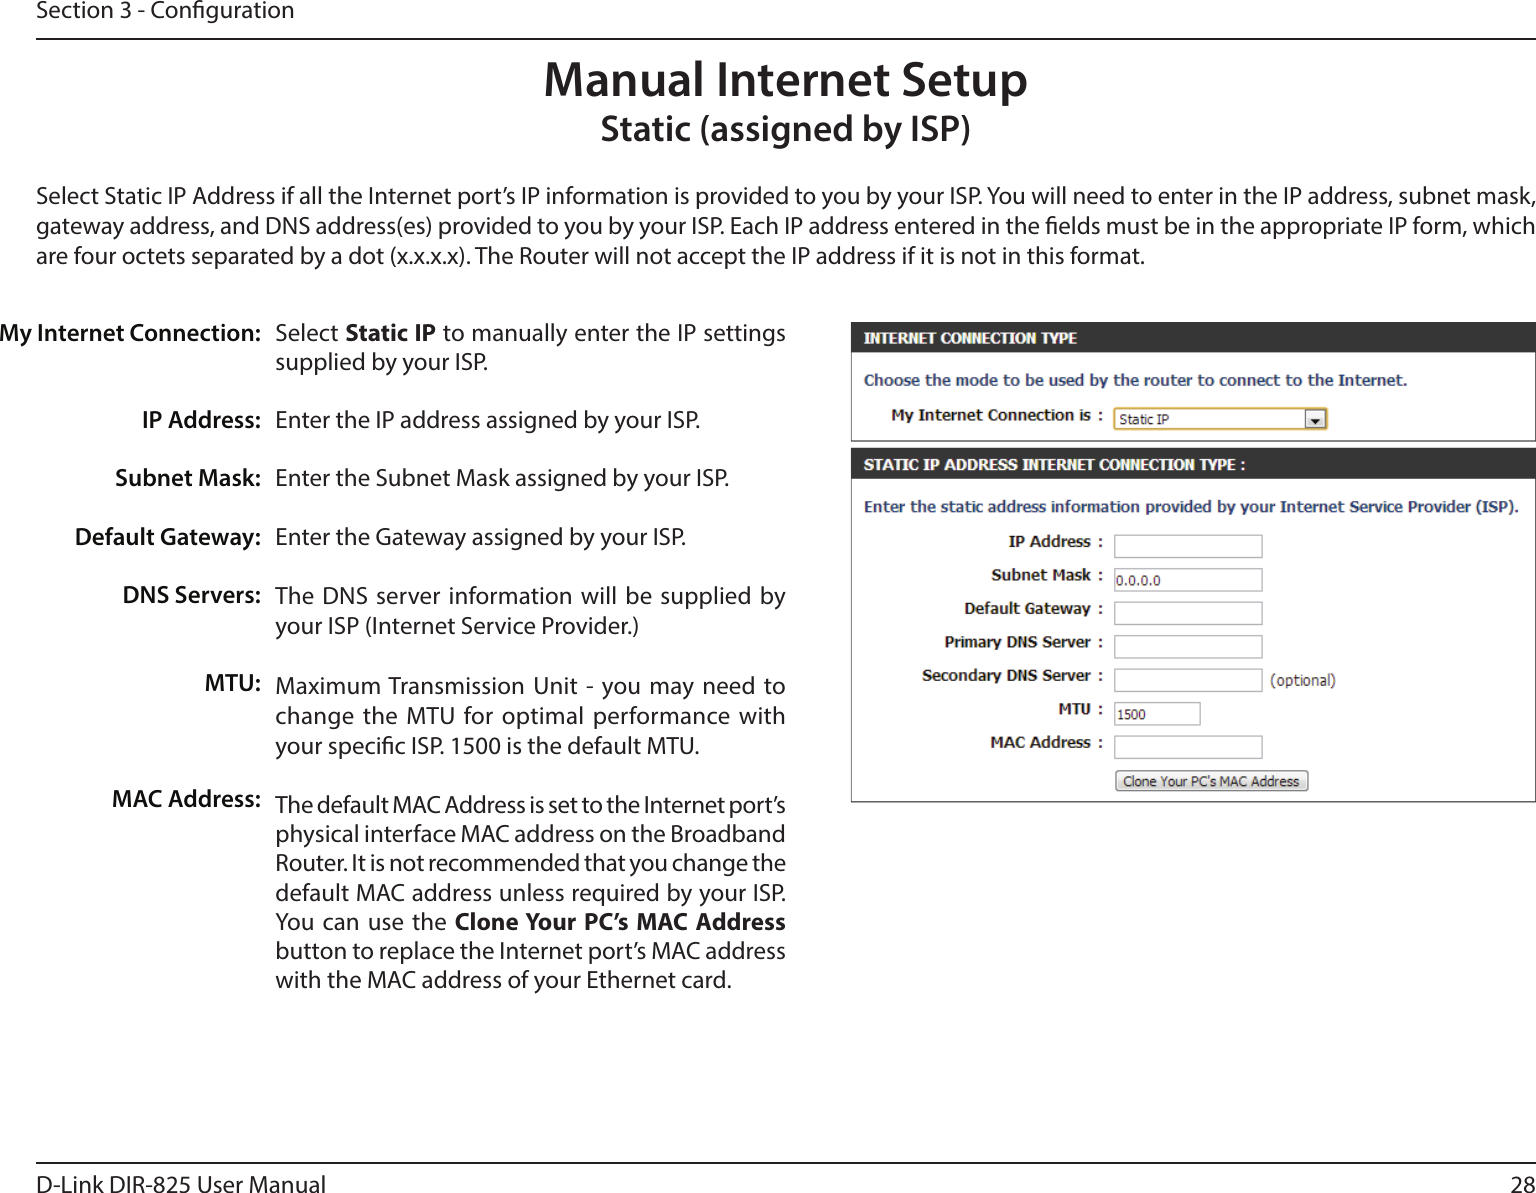 28D-Link DIR-825 User ManualSection 3 - CongurationSelect Static IP to manually enter the IP settings supplied by your ISP.Enter the IP address assigned by your ISP.Enter the Subnet Mask assigned by your ISP.Enter the Gateway assigned by your ISP.The DNS server information will be supplied by your ISP (Internet Service Provider.)Maximum Transmission Unit - you may need to change the MTU for optimal performance with your specic ISP. 1500 is the default MTU.The default MAC Address is set to the Internet port’s physical interface MAC address on the Broadband Router. It is not recommended that you change the default MAC address unless required by your ISP.  You can use the Clone Your PC’s MAC Address button to replace the Internet port’s MAC address with the MAC address of your Ethernet card.My Internet Connection:IP Address:Subnet Mask:Default Gateway:DNS Servers:MTU:MAC Address:Manual Internet SetupStatic (assigned by ISP)Select Static IP Address if all the Internet port’s IP information is provided to you by your ISP. You will need to enter in the IP address, subnet mask, gateway address, and DNS address(es) provided to you by your ISP. Each IP address entered in the elds must be in the appropriate IP form, which are four octets separated by a dot (x.x.x.x). The Router will not accept the IP address if it is not in this format.